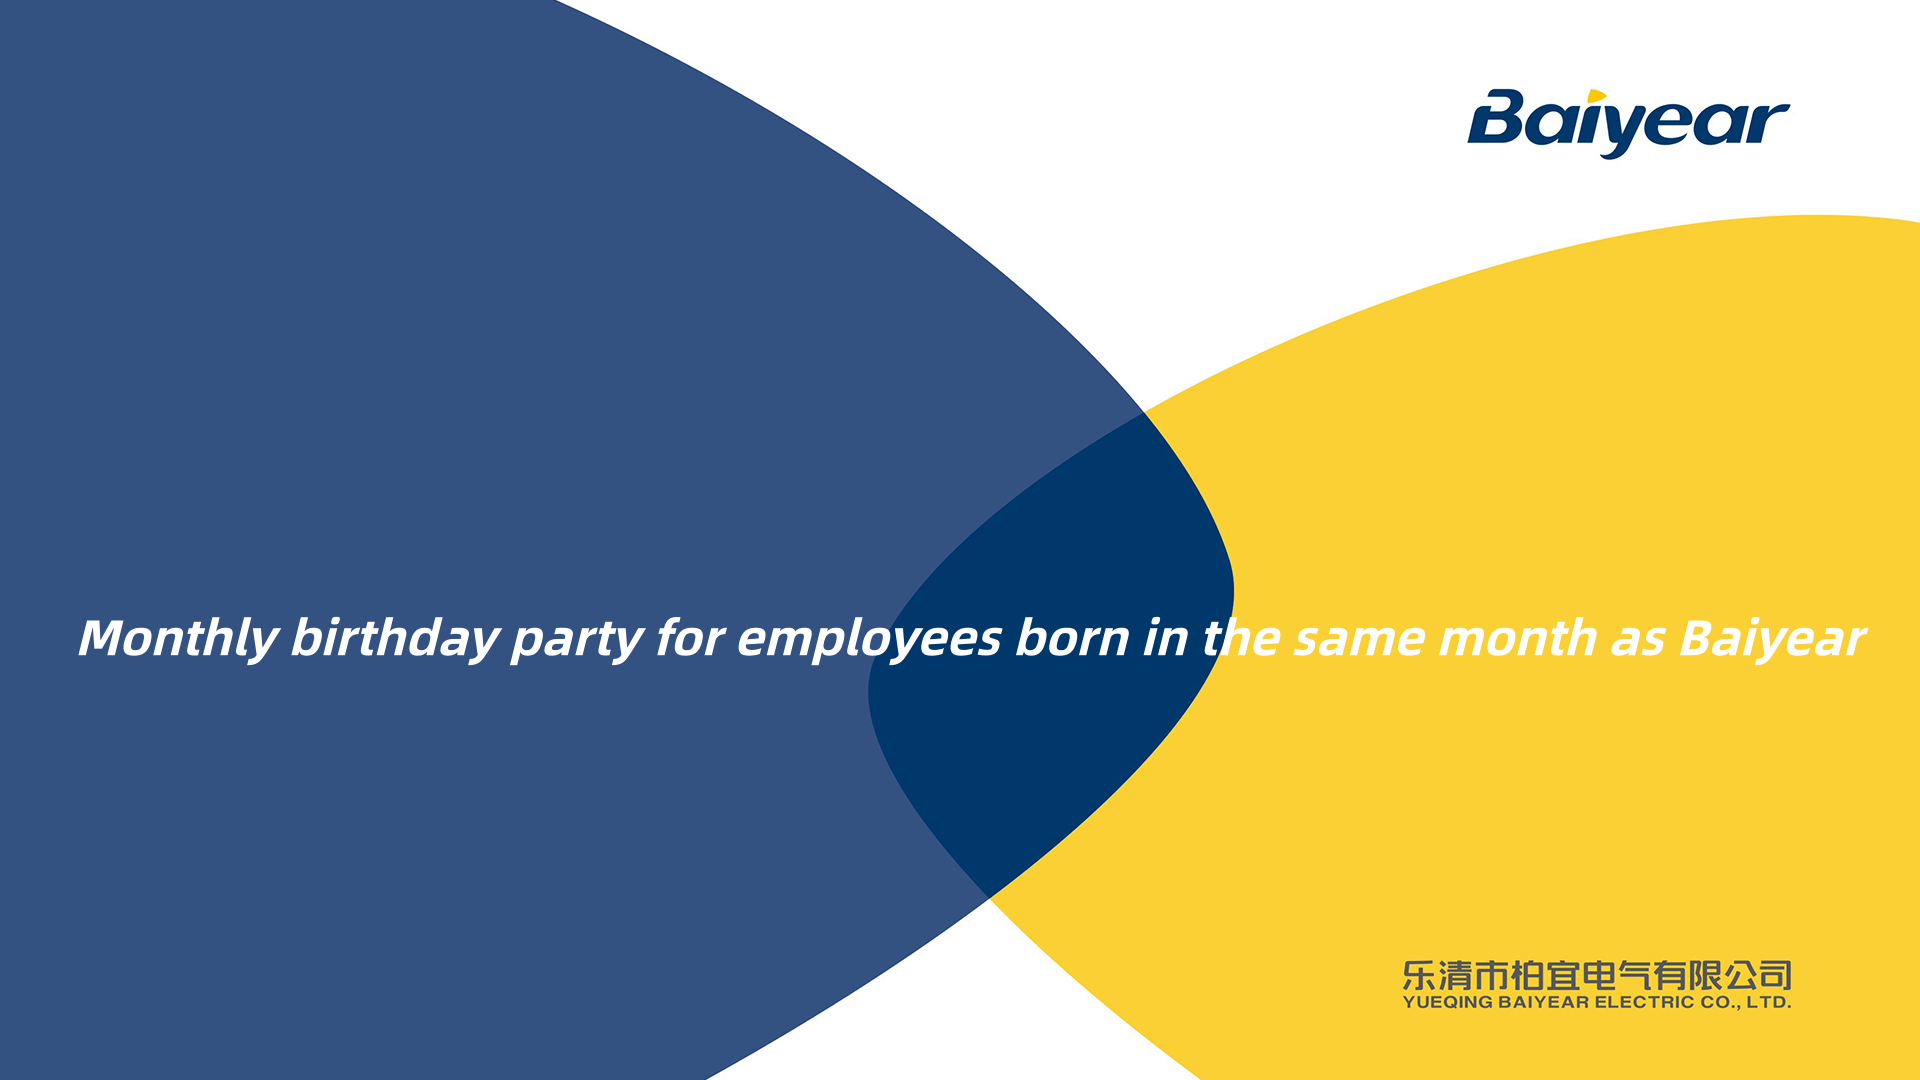 Monthly birthday party for employees born in the same month as Baiyear.